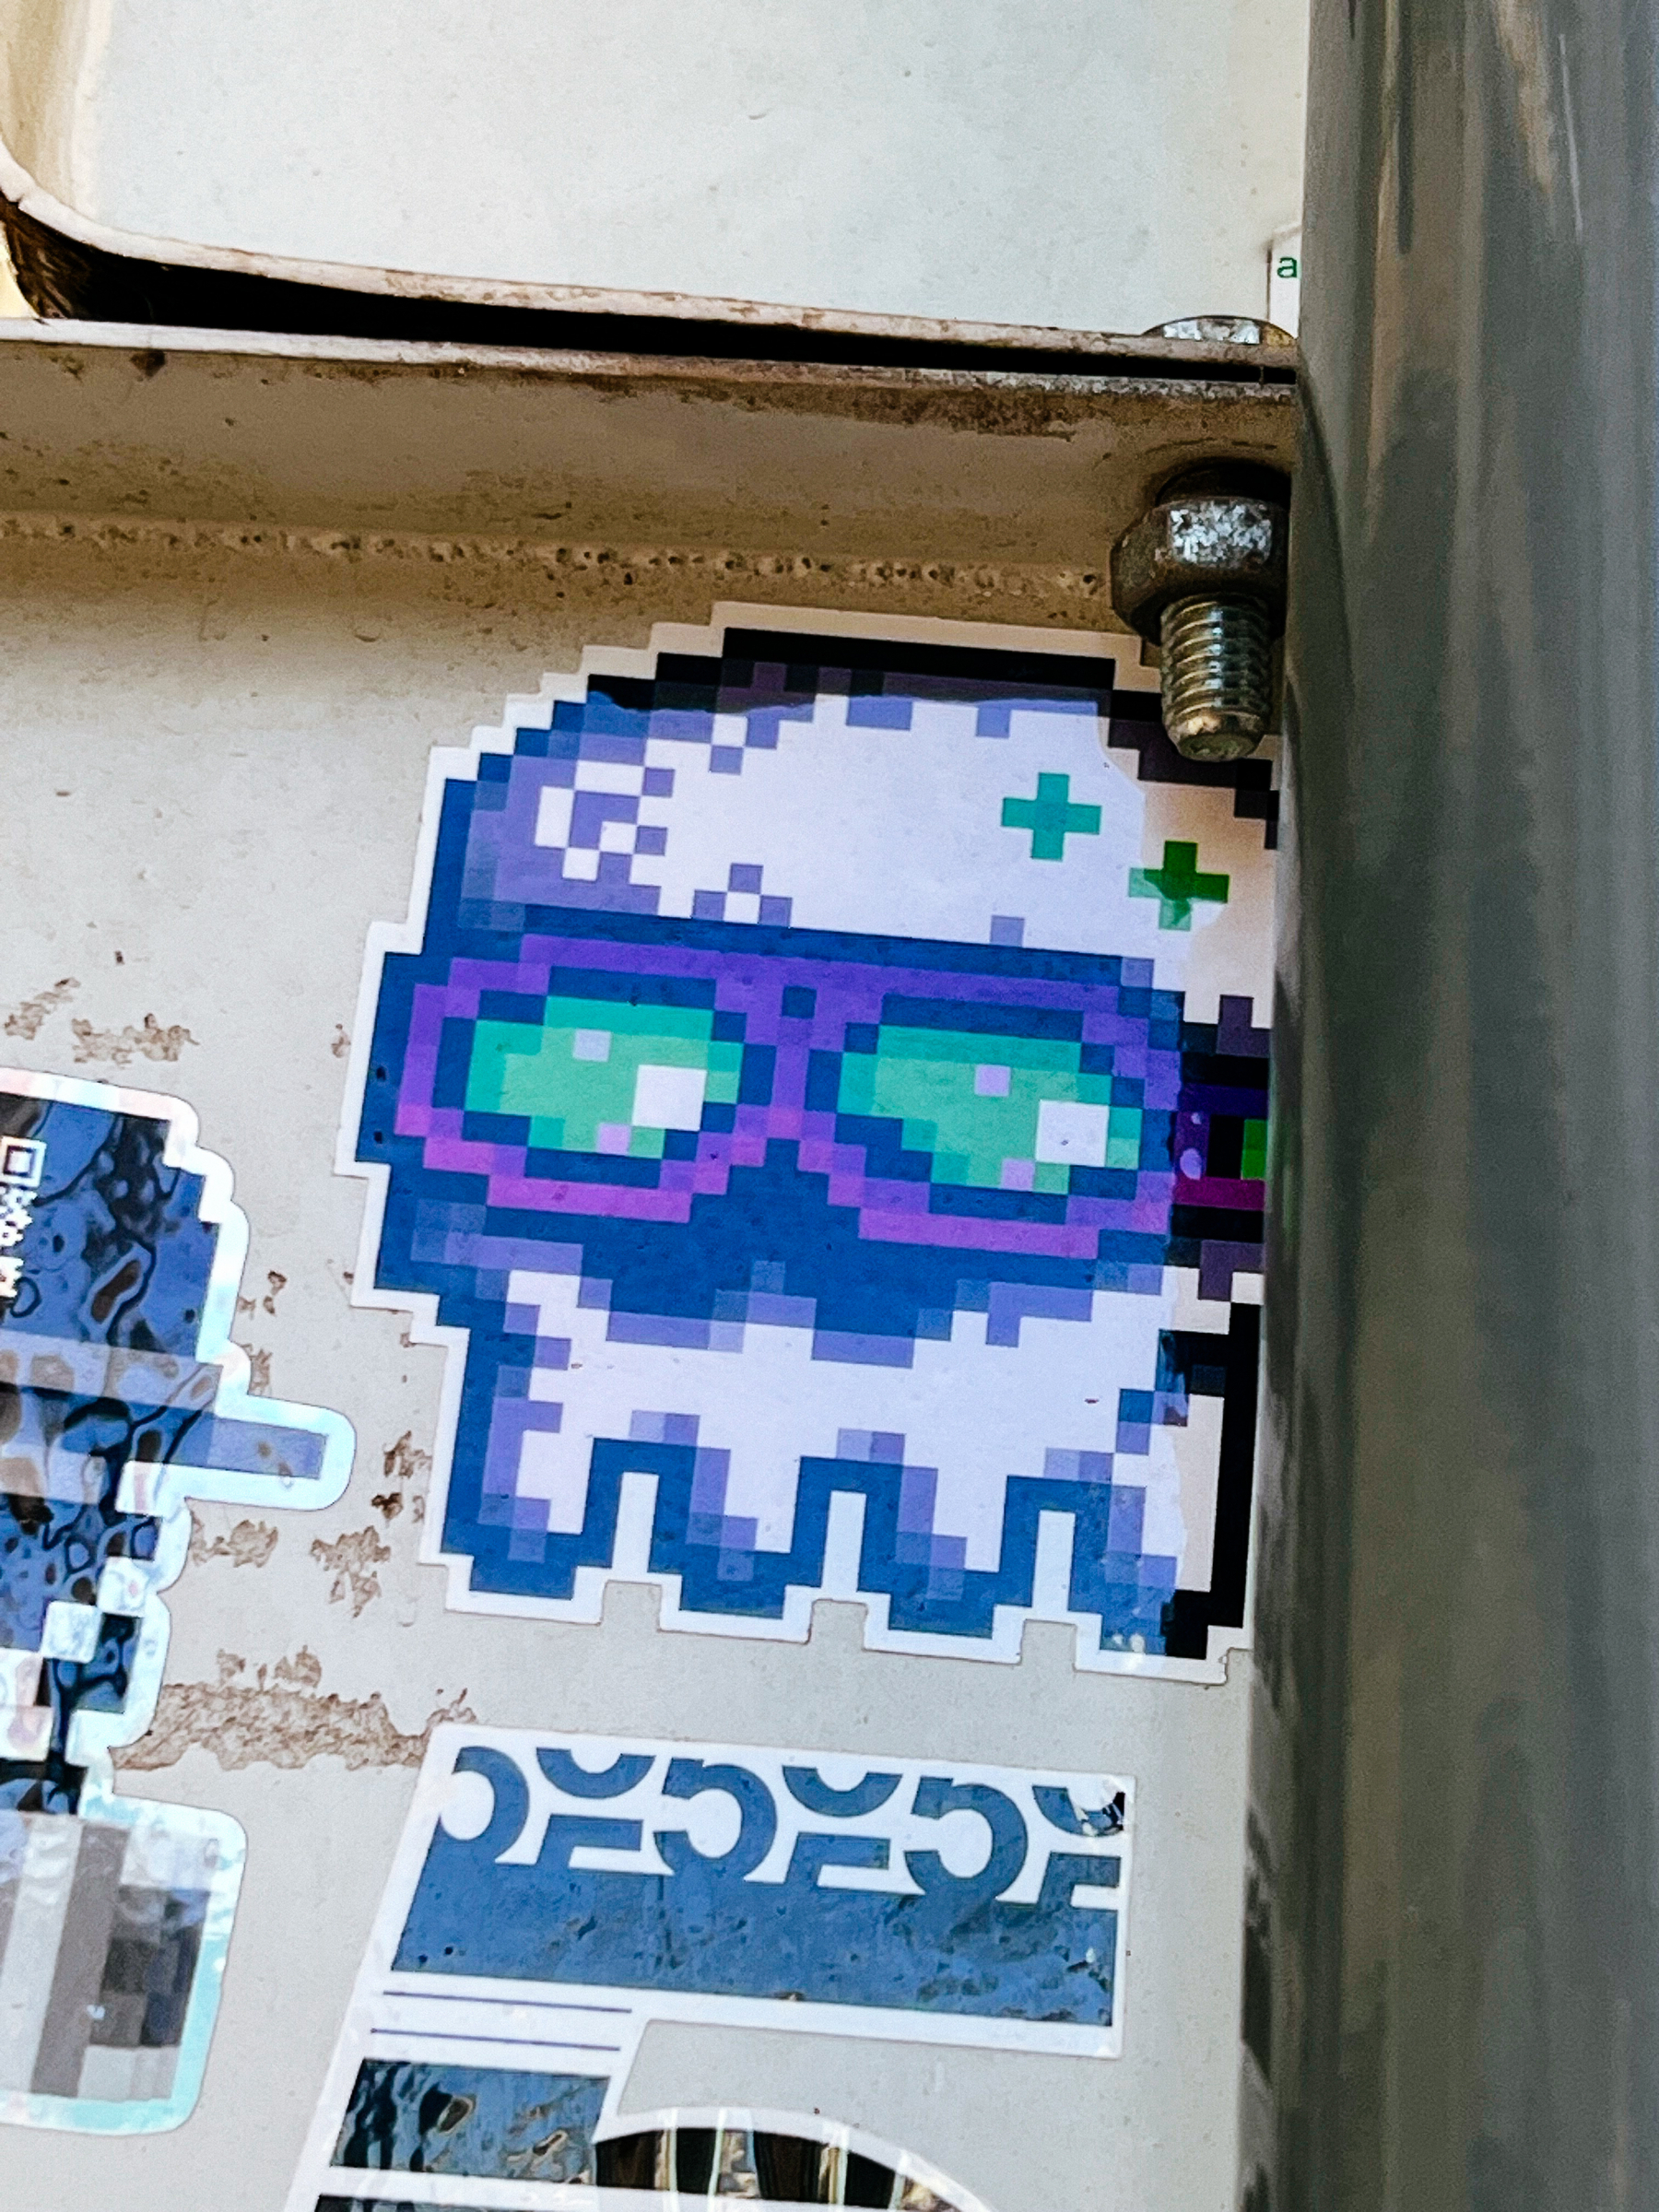 A pixelated squid skull with shades. In a sticker. 